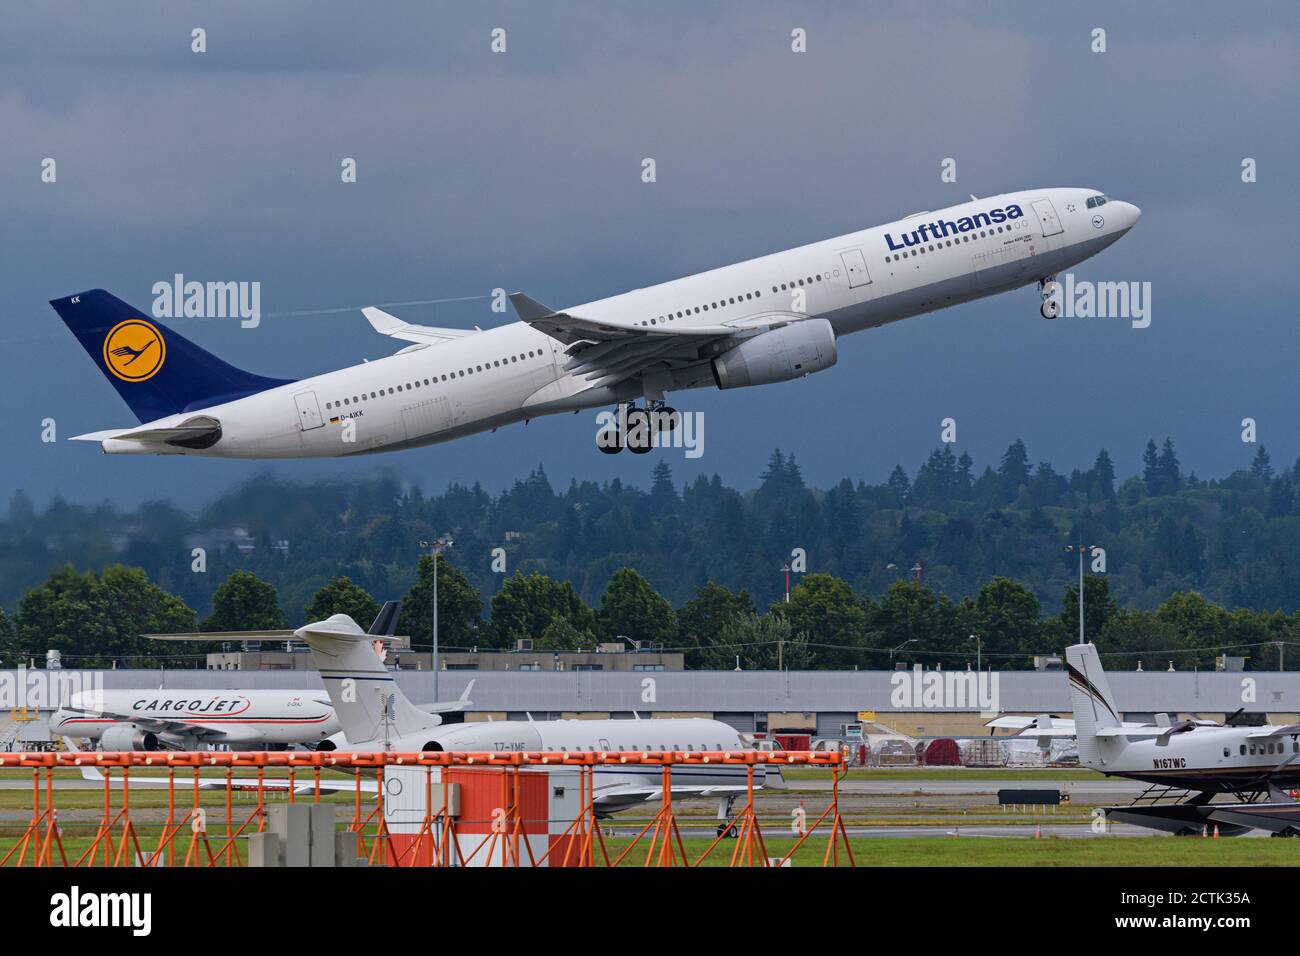 Lufthansa plane Airbus A330-300 airborne after take-off from Vancouver International Airport. Stock Photo